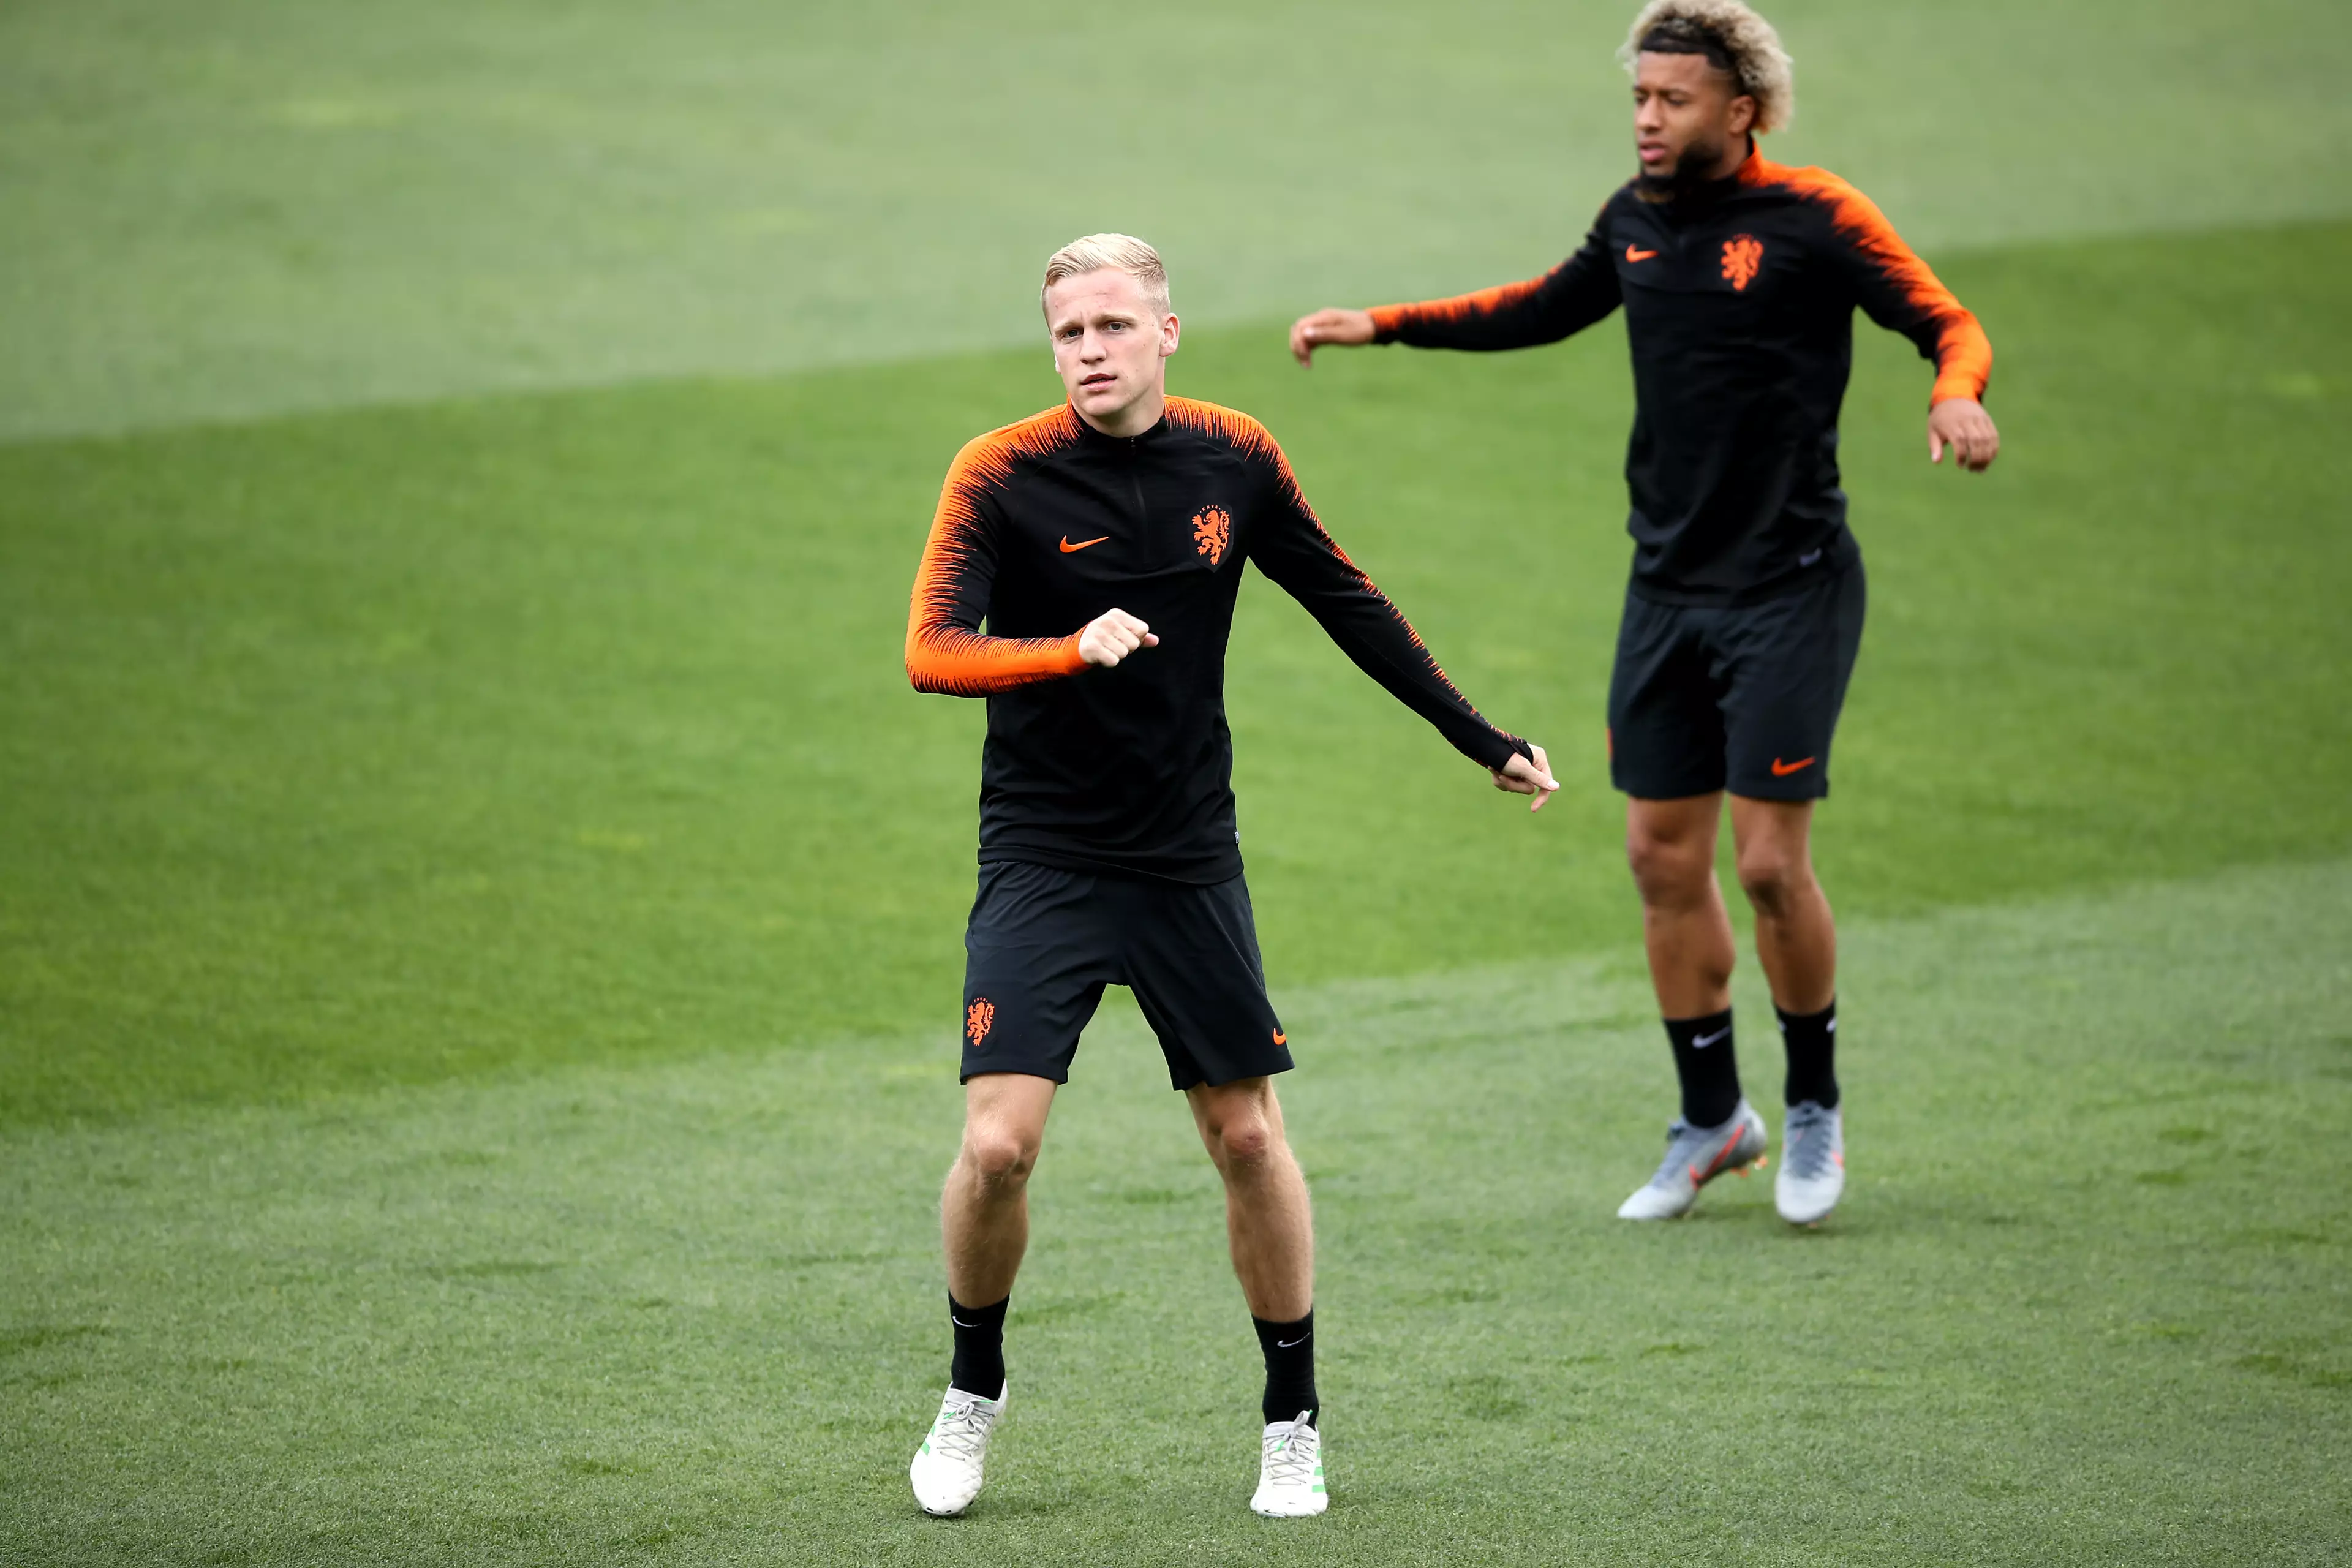 Van de Beek was also part of the Netherland's Nations League squad. Image: PA Images